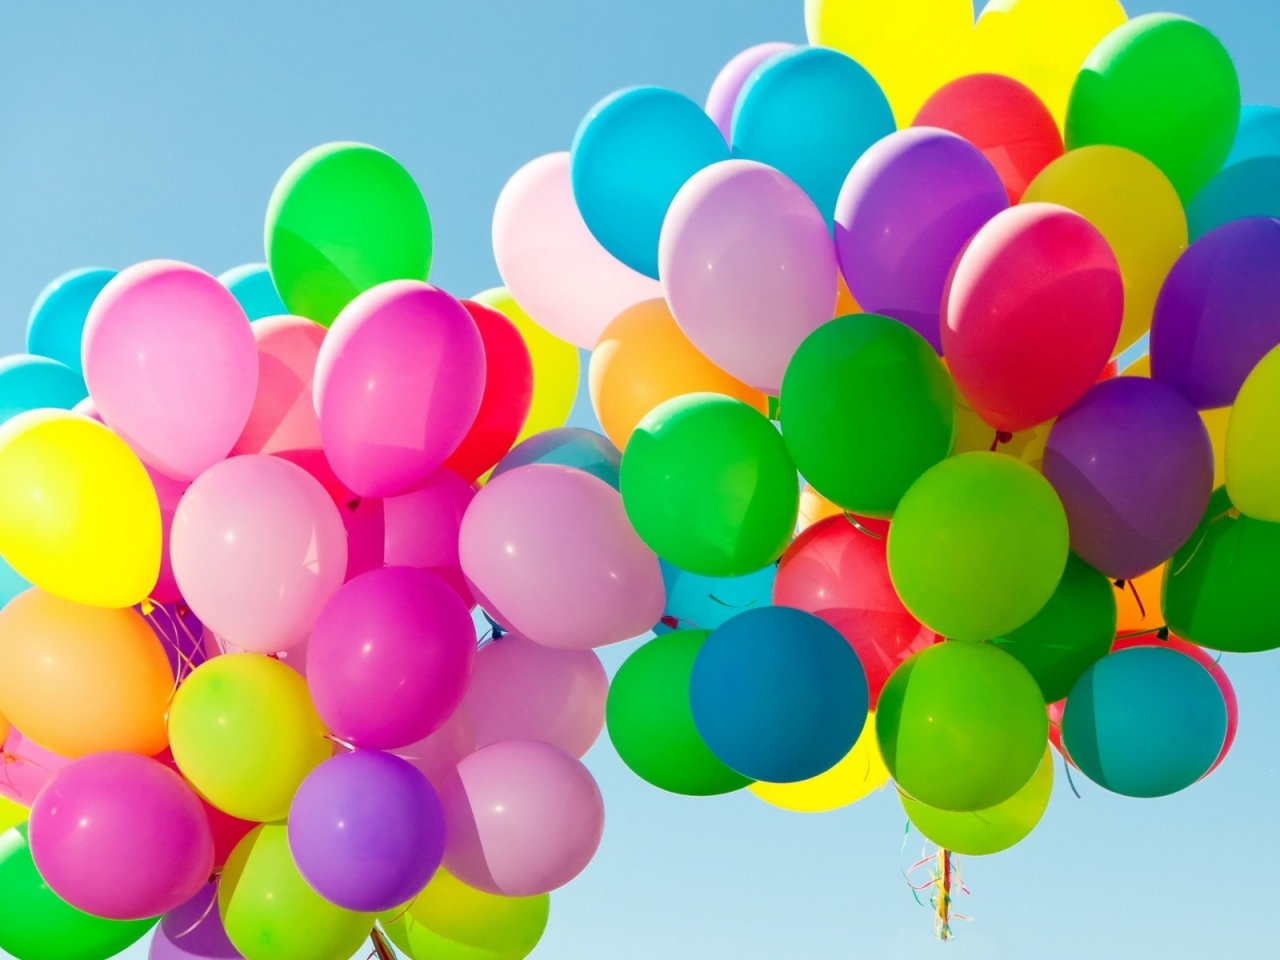 Colorful Balloons in the Sky for 1280 x 960 resolution